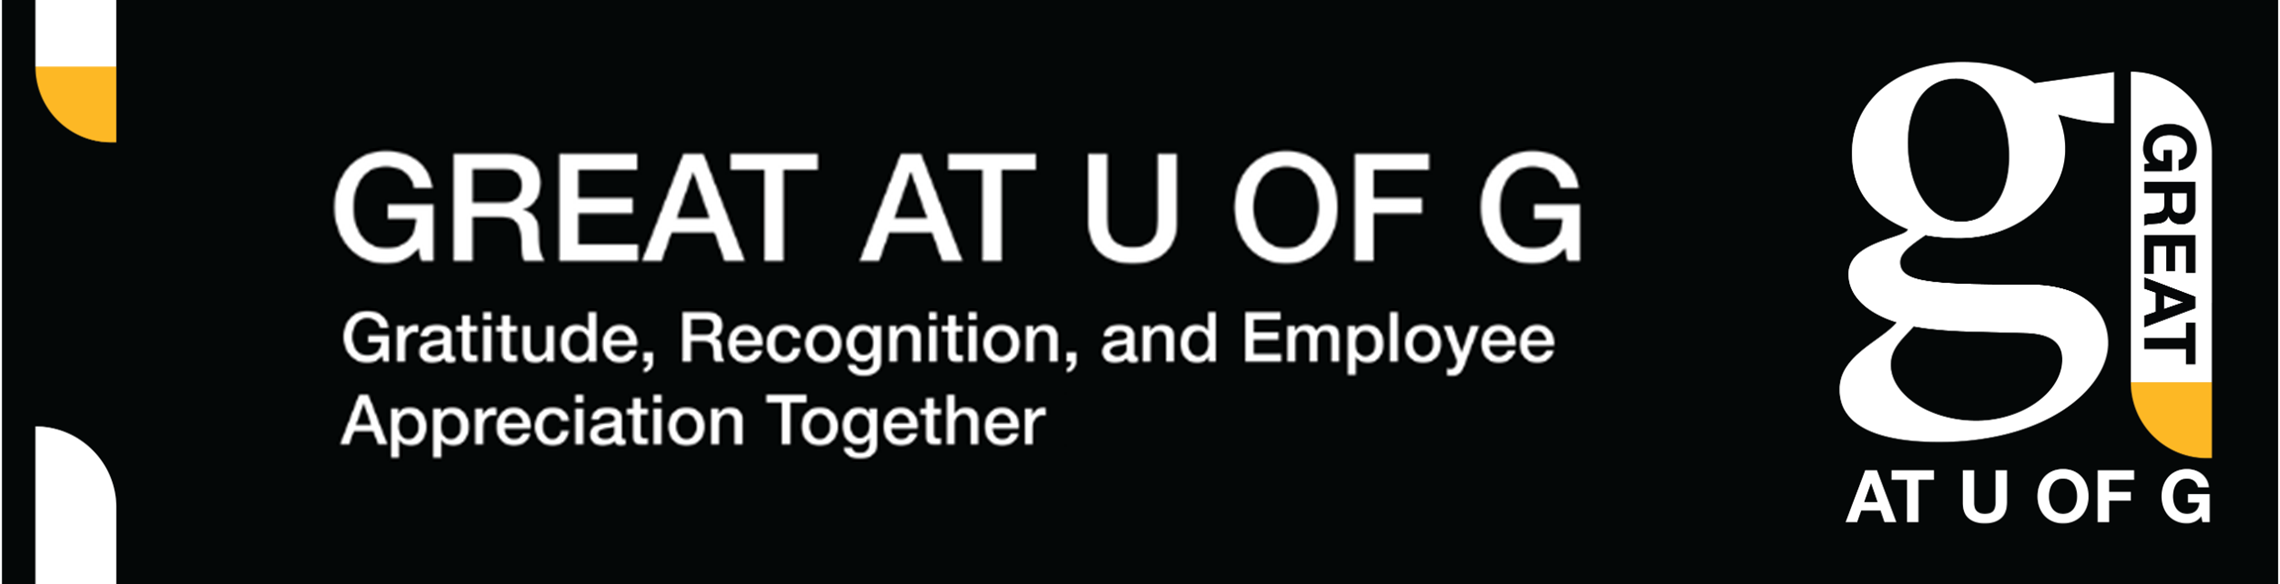 GREAT at U of G logo and text, "GREAT at U of G Gratitude, Recognition, and Employee Appreciation Together"